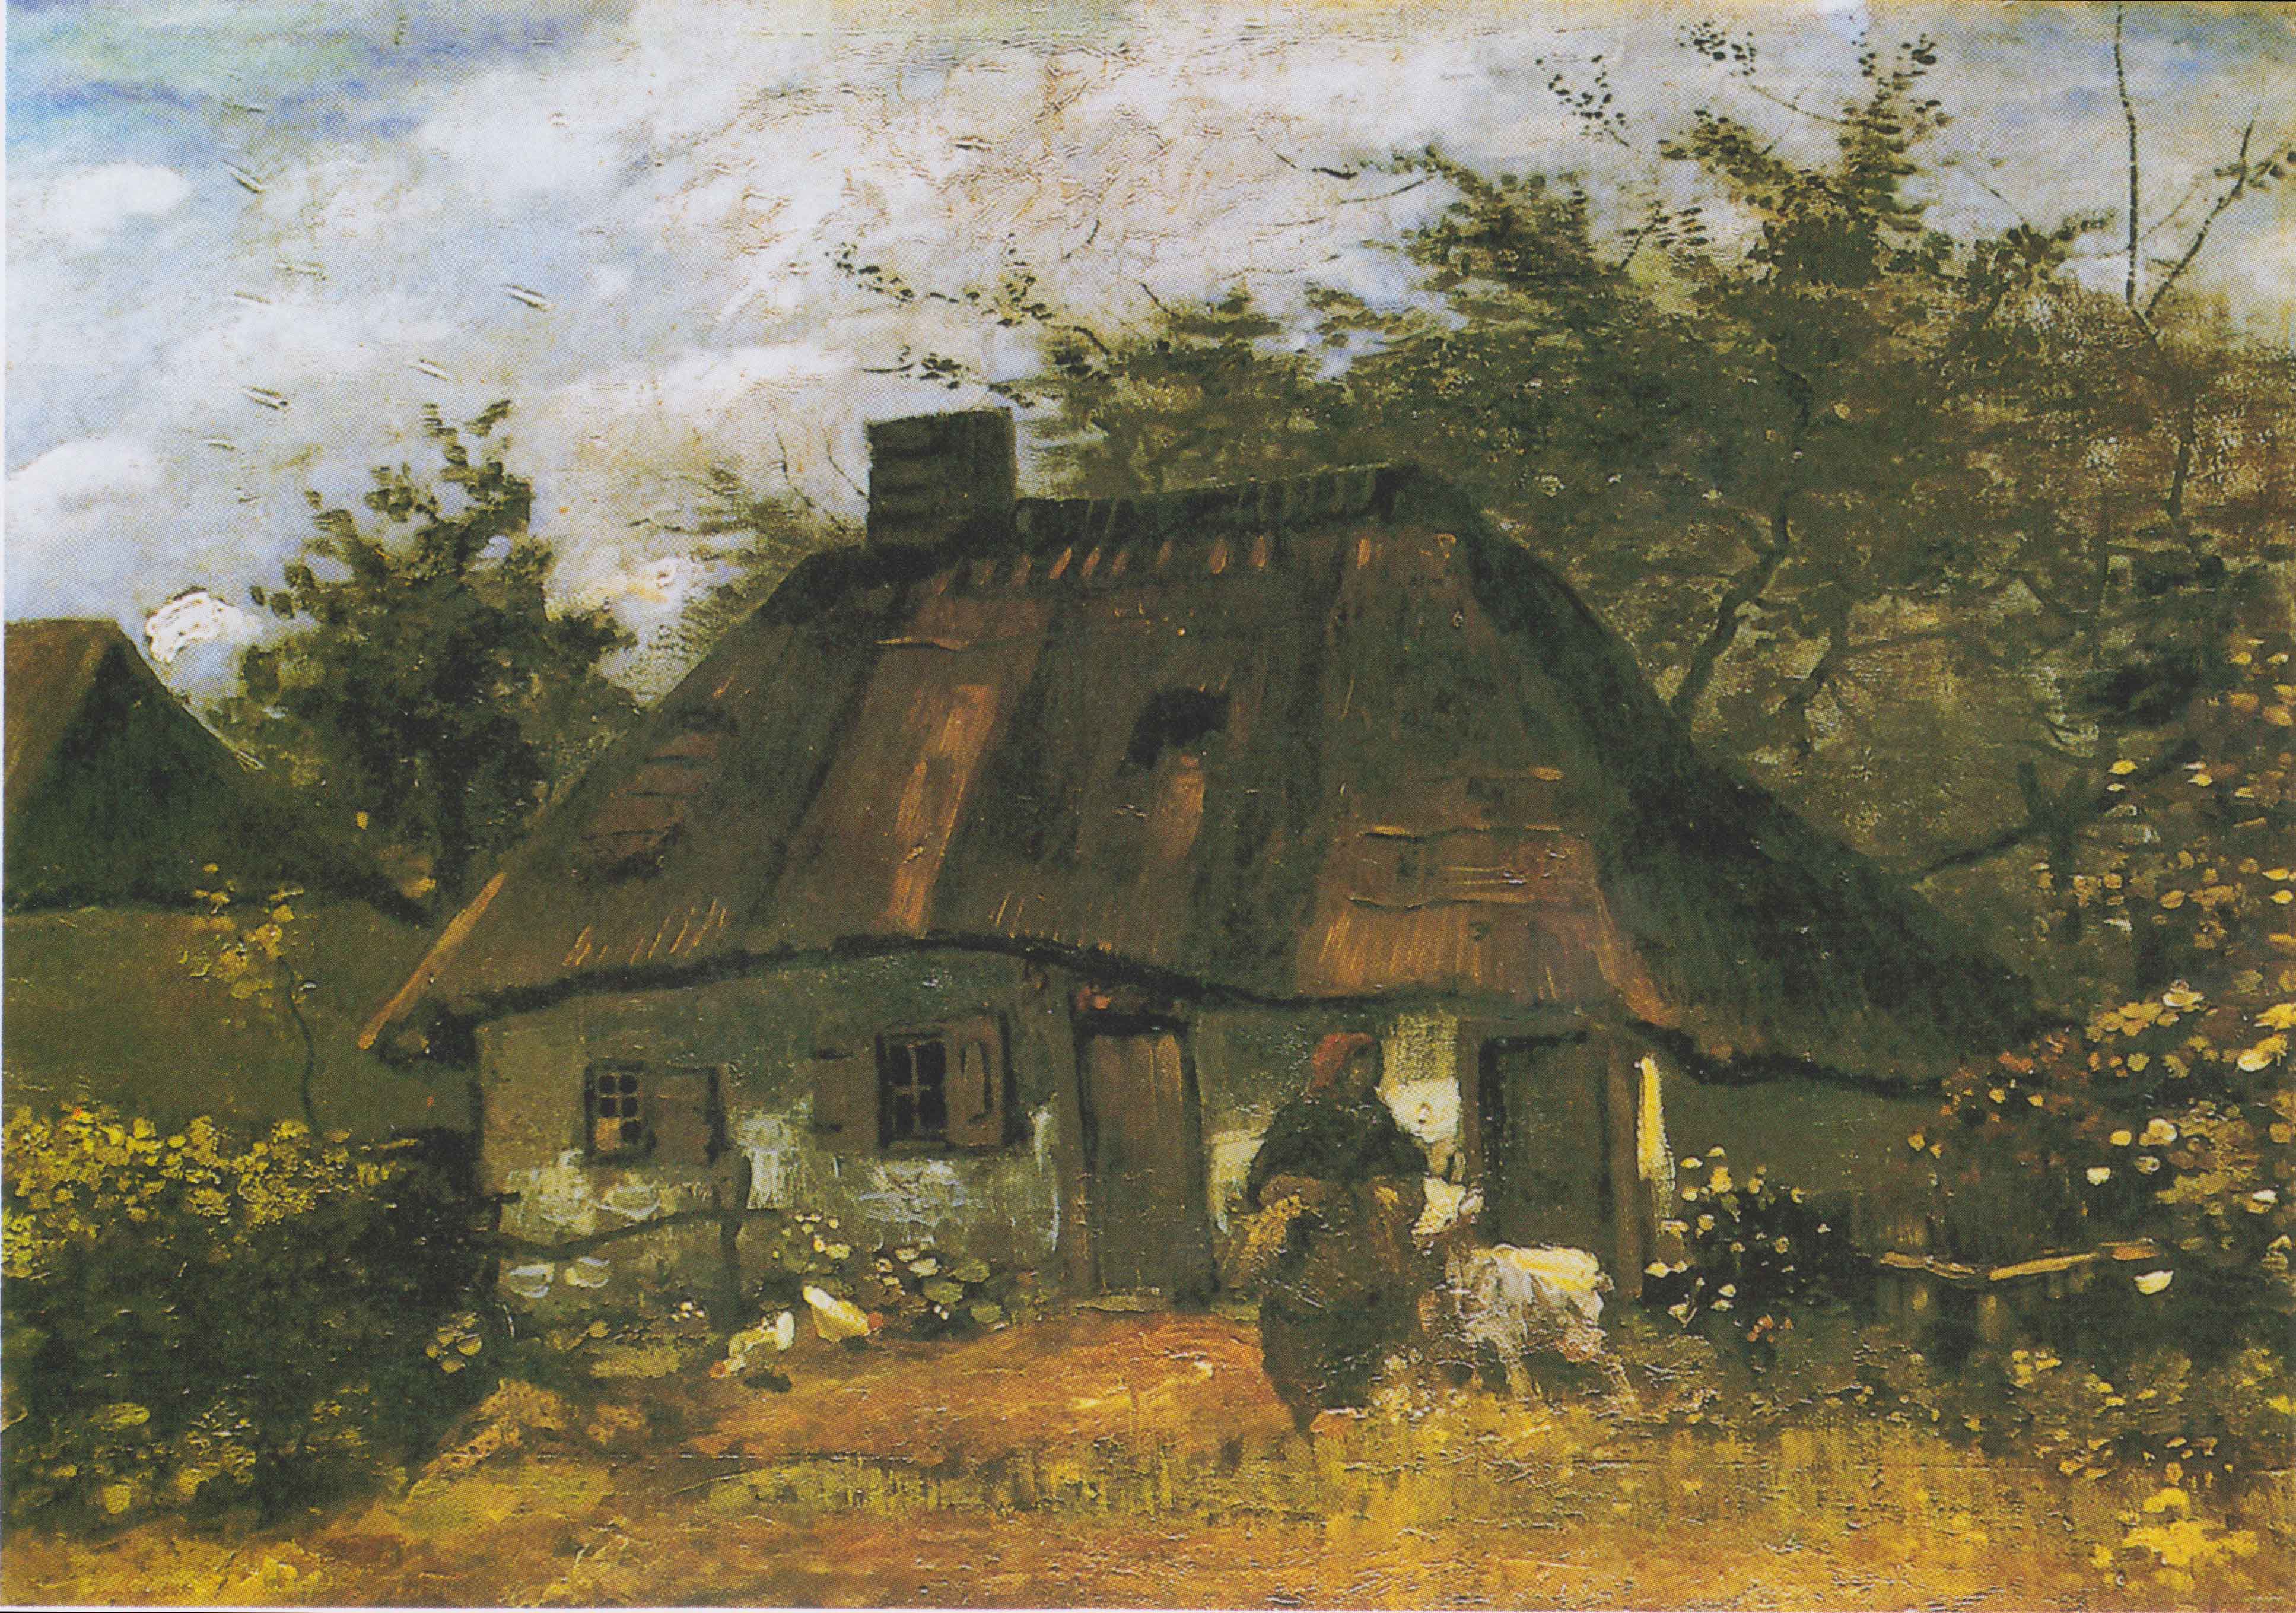 Farmhouse and Woman with Goat